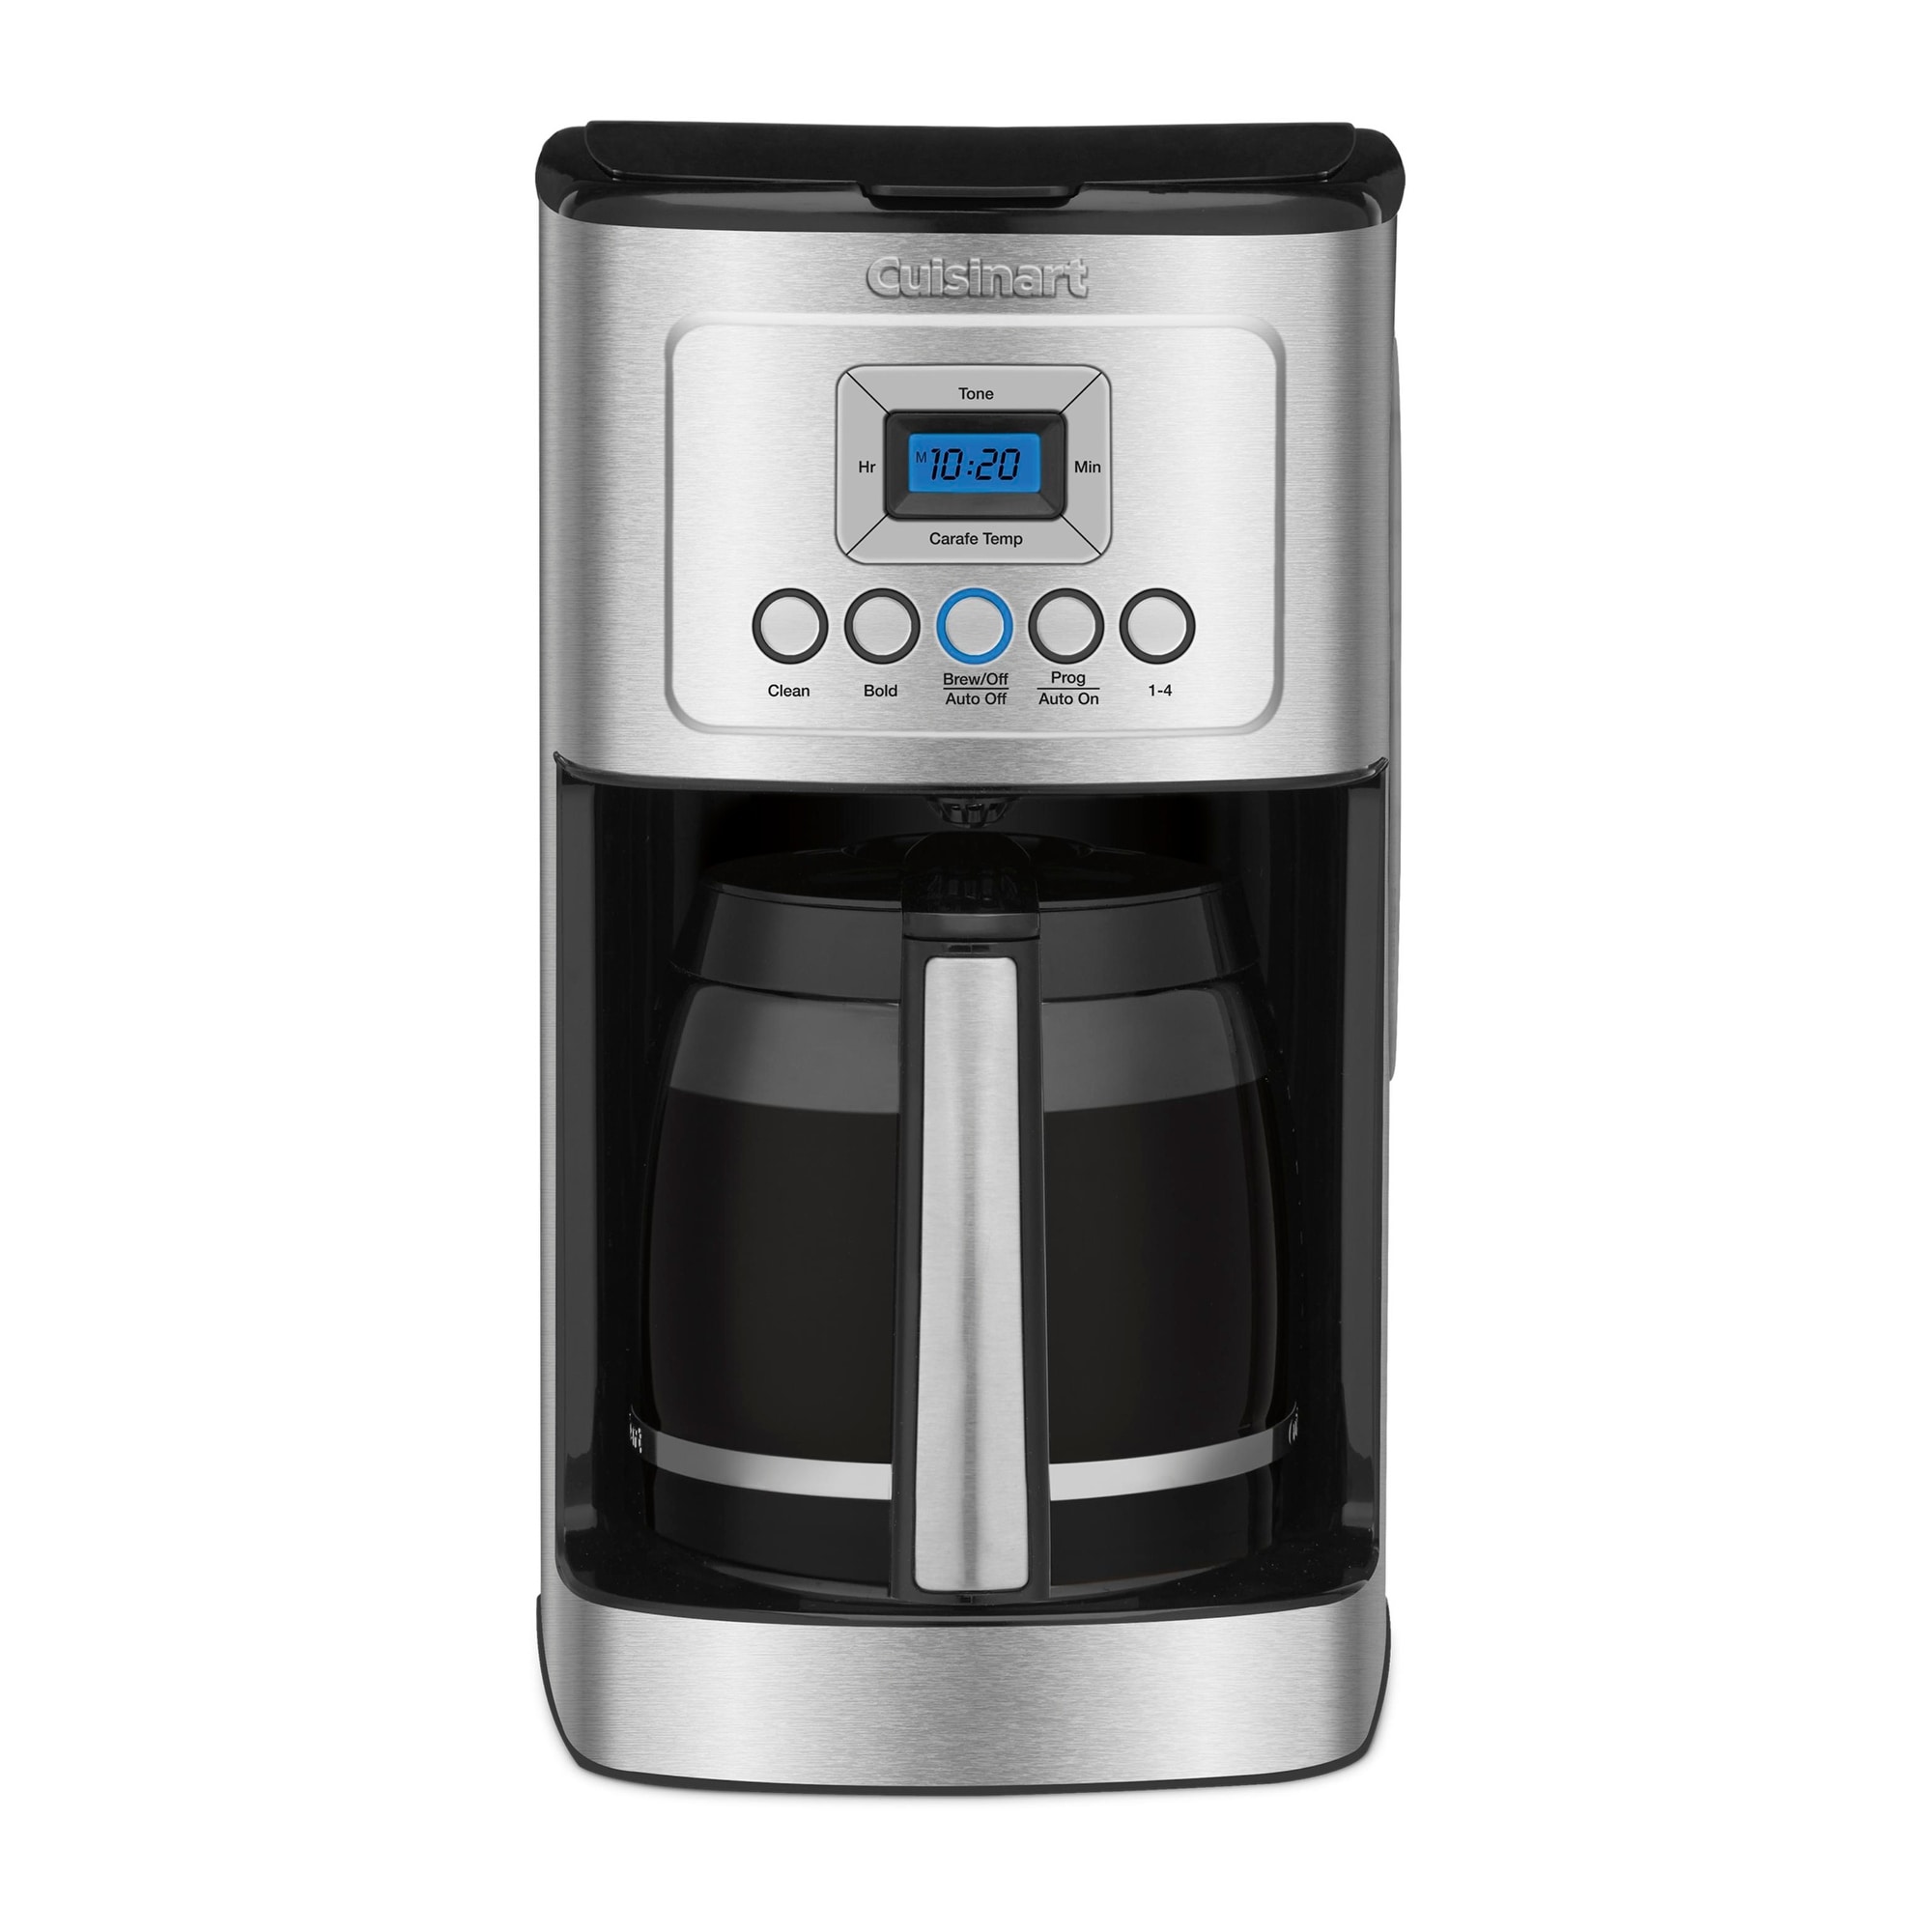 https://ak1.ostkcdn.com/images/products/is/images/direct/f1bffa9af7d7186080a8176577910108a46b1189/14-Cup-PerfecTemp-Programmable-Coffeemaker.jpg